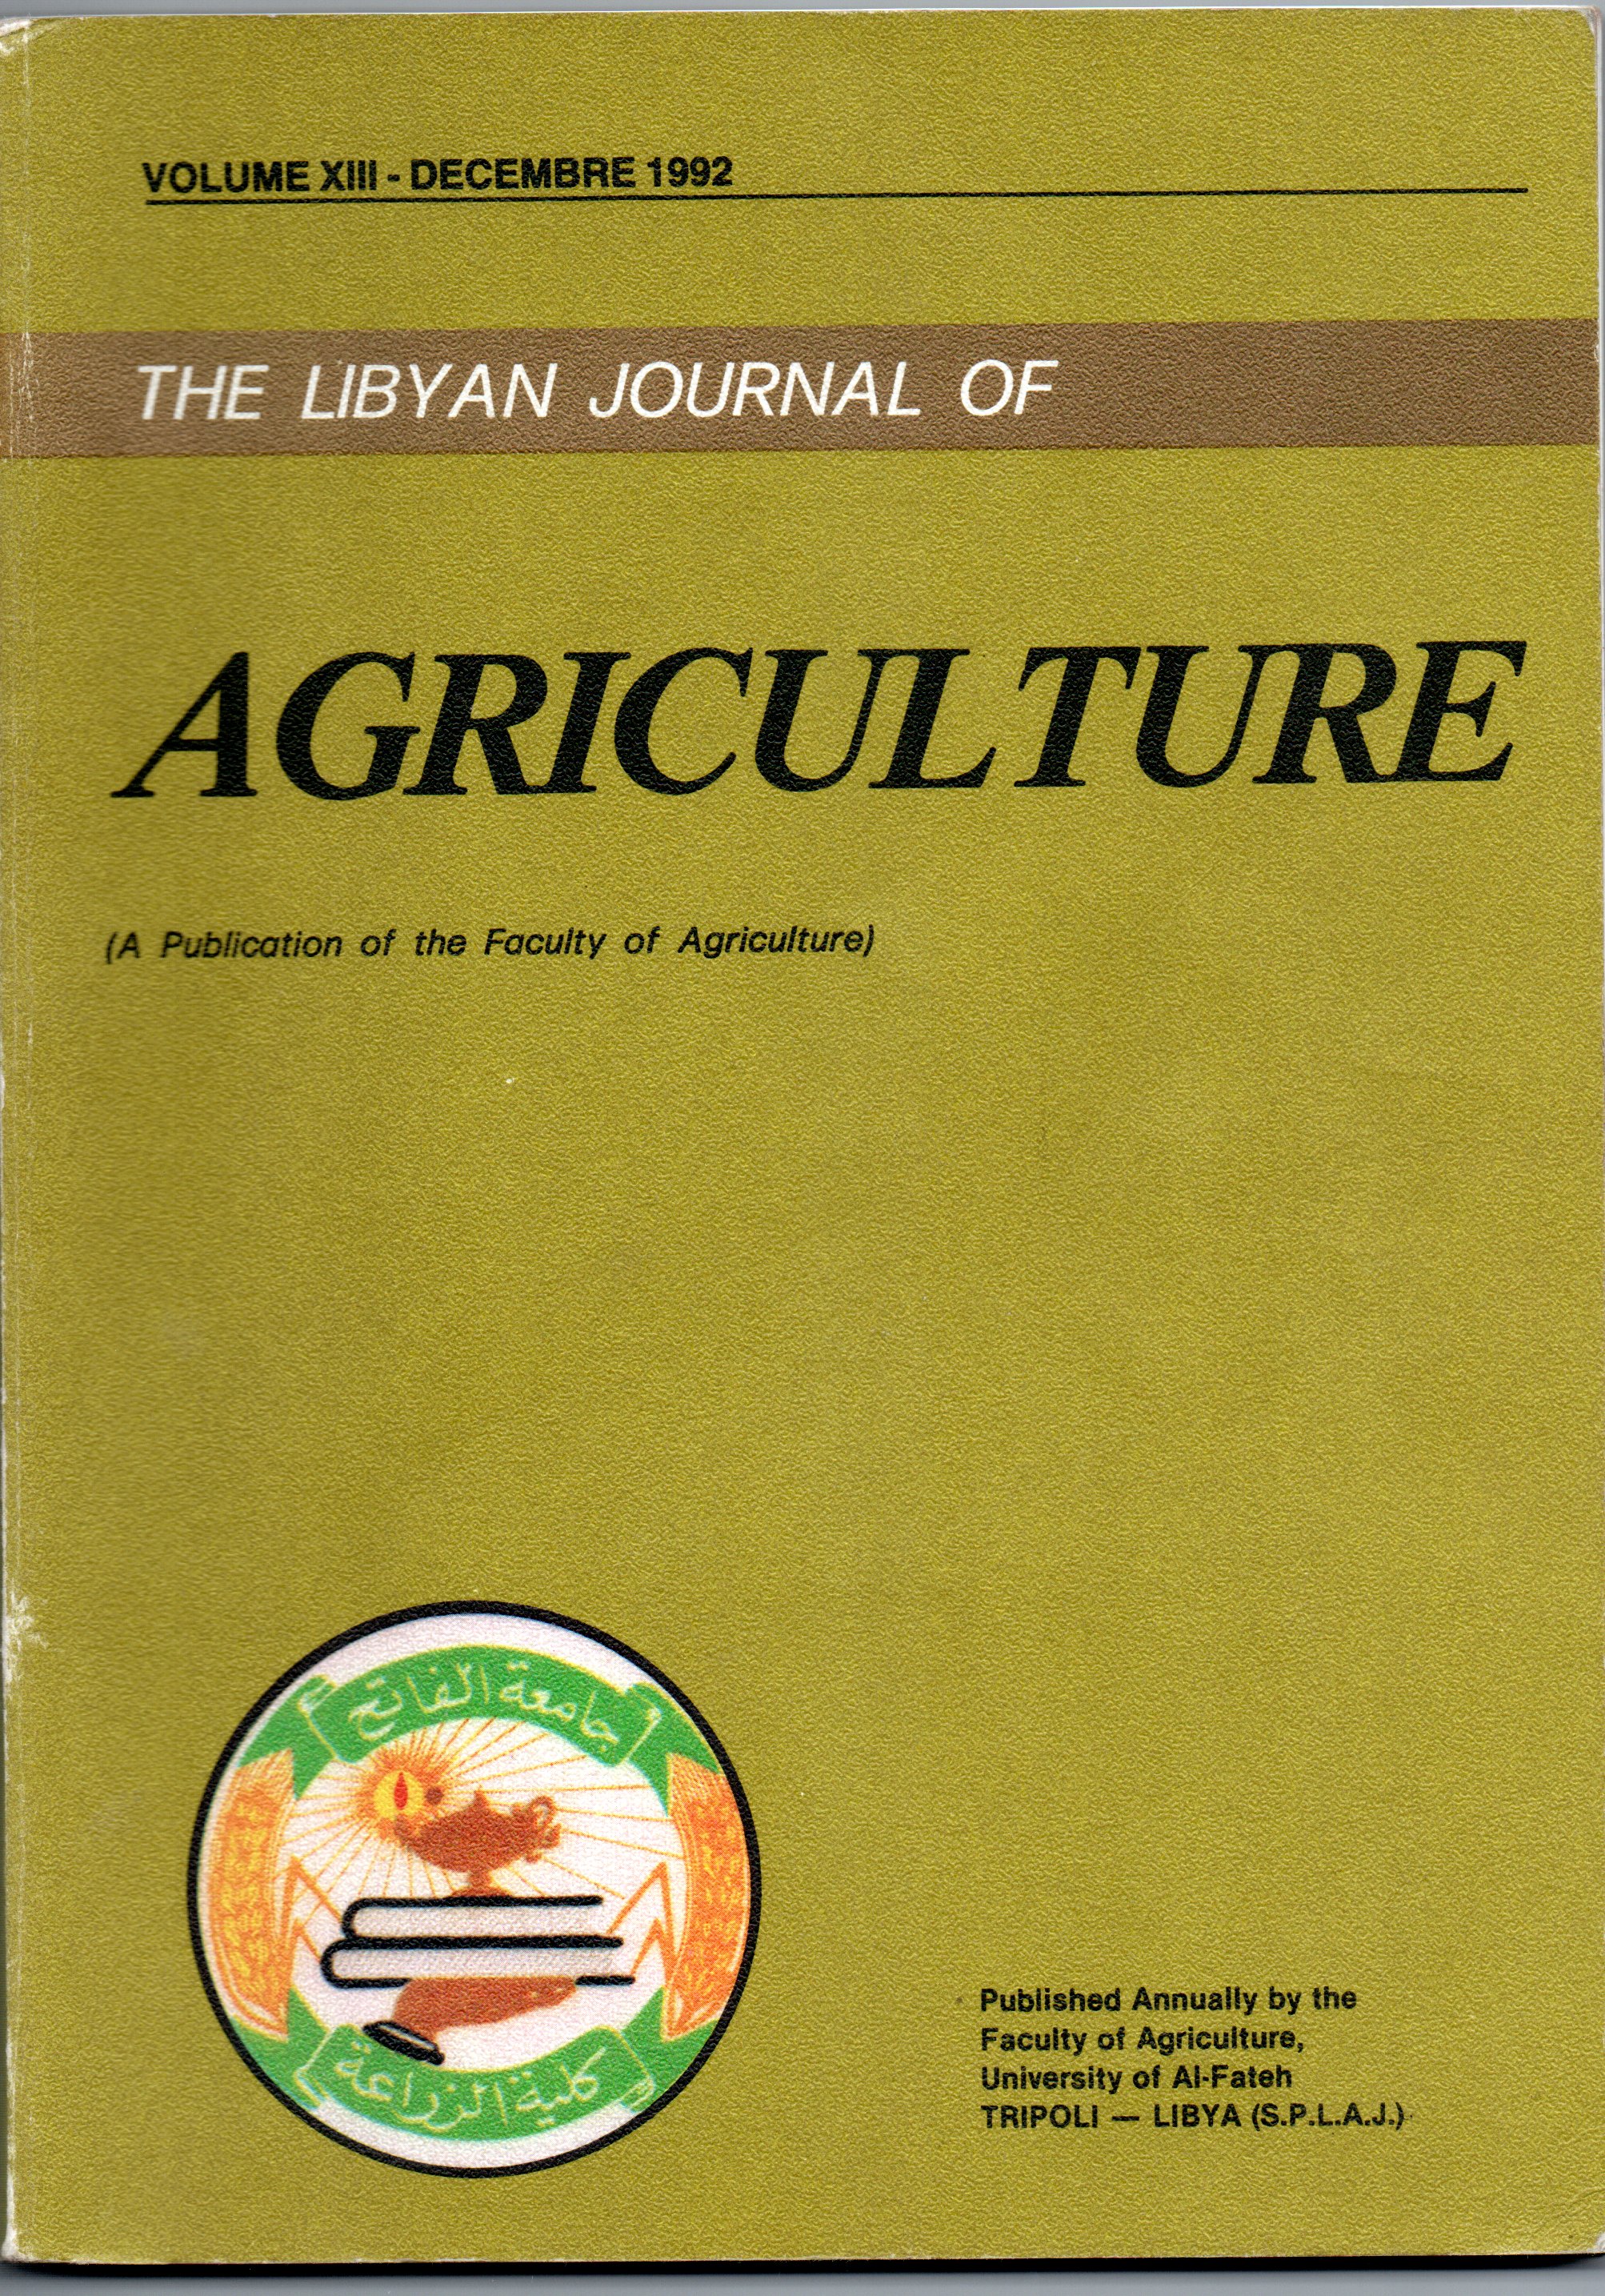 					View Vol. 13 No. 1 (1992): The Libyan Journal of Agriculture
				